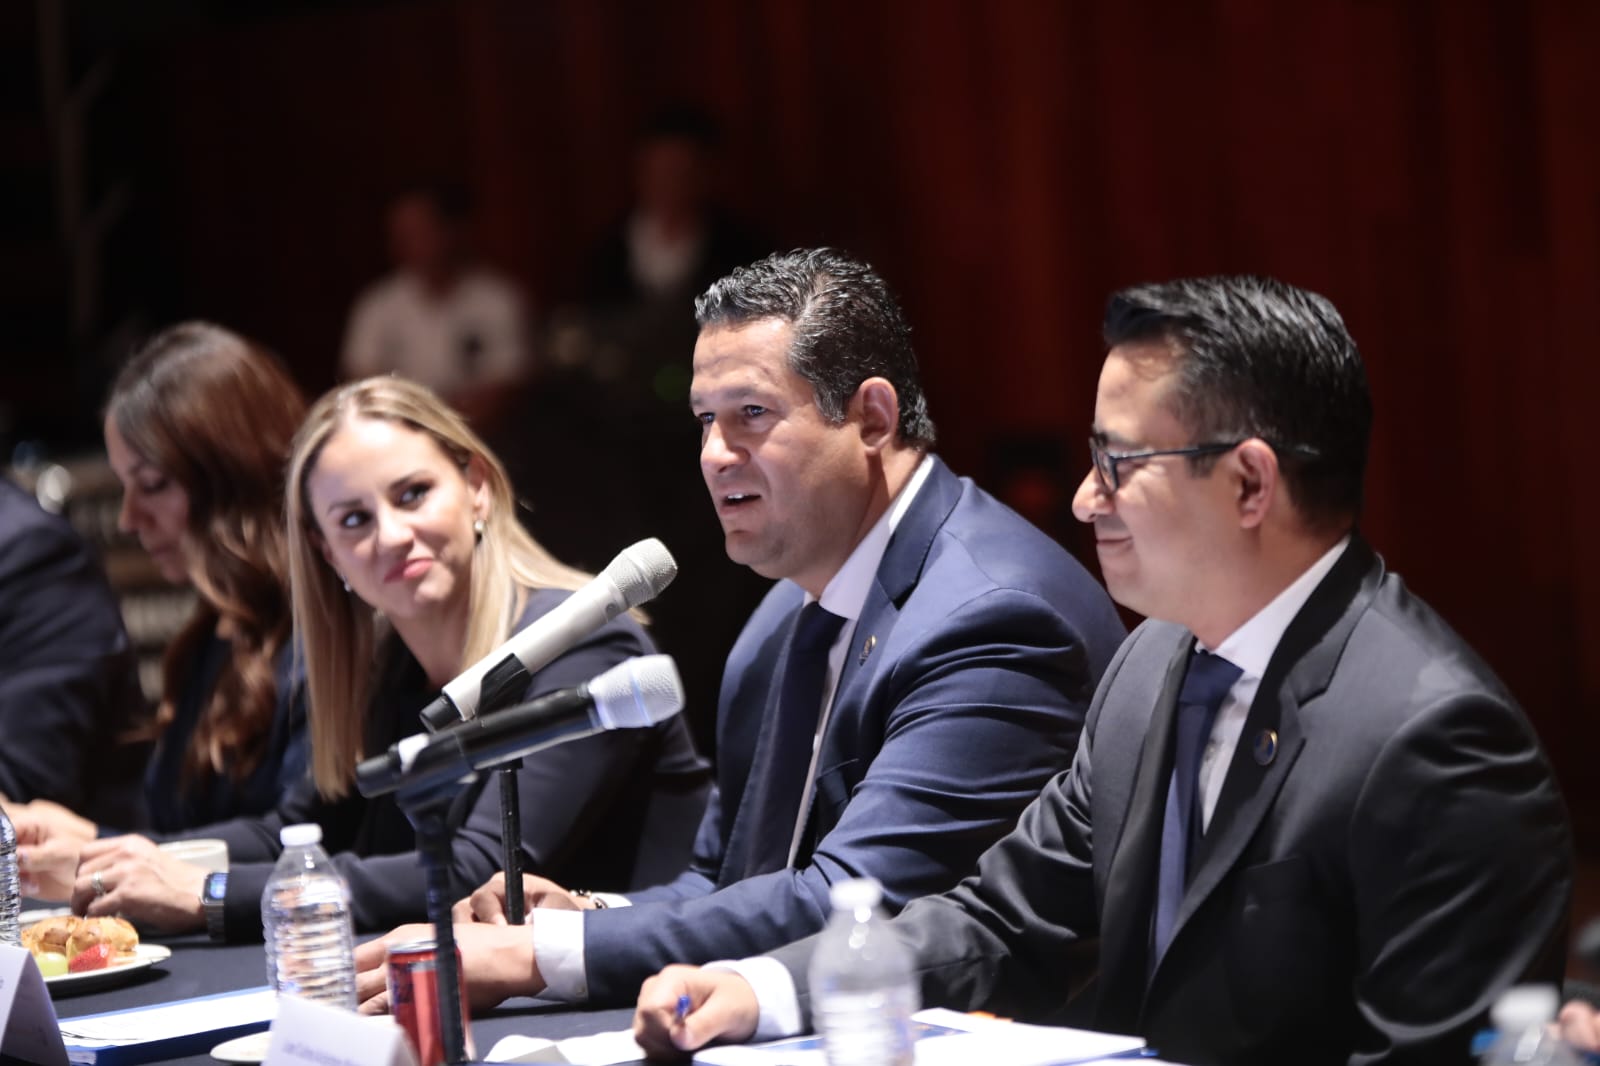 Government year-end’s wrap up for Guanajuato